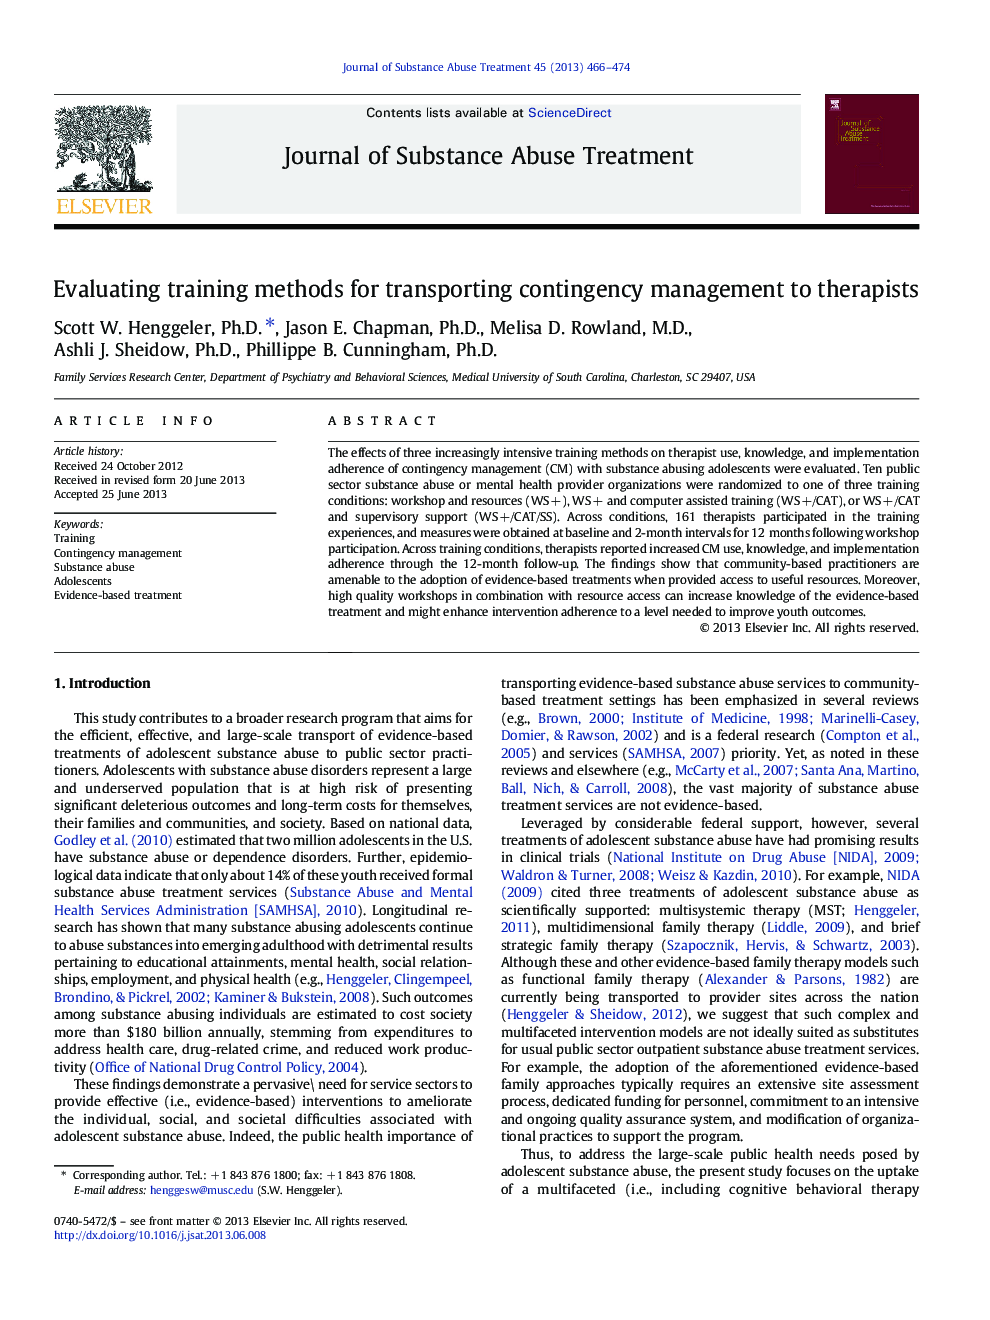 Evaluating training methods for transporting contingency management to therapists